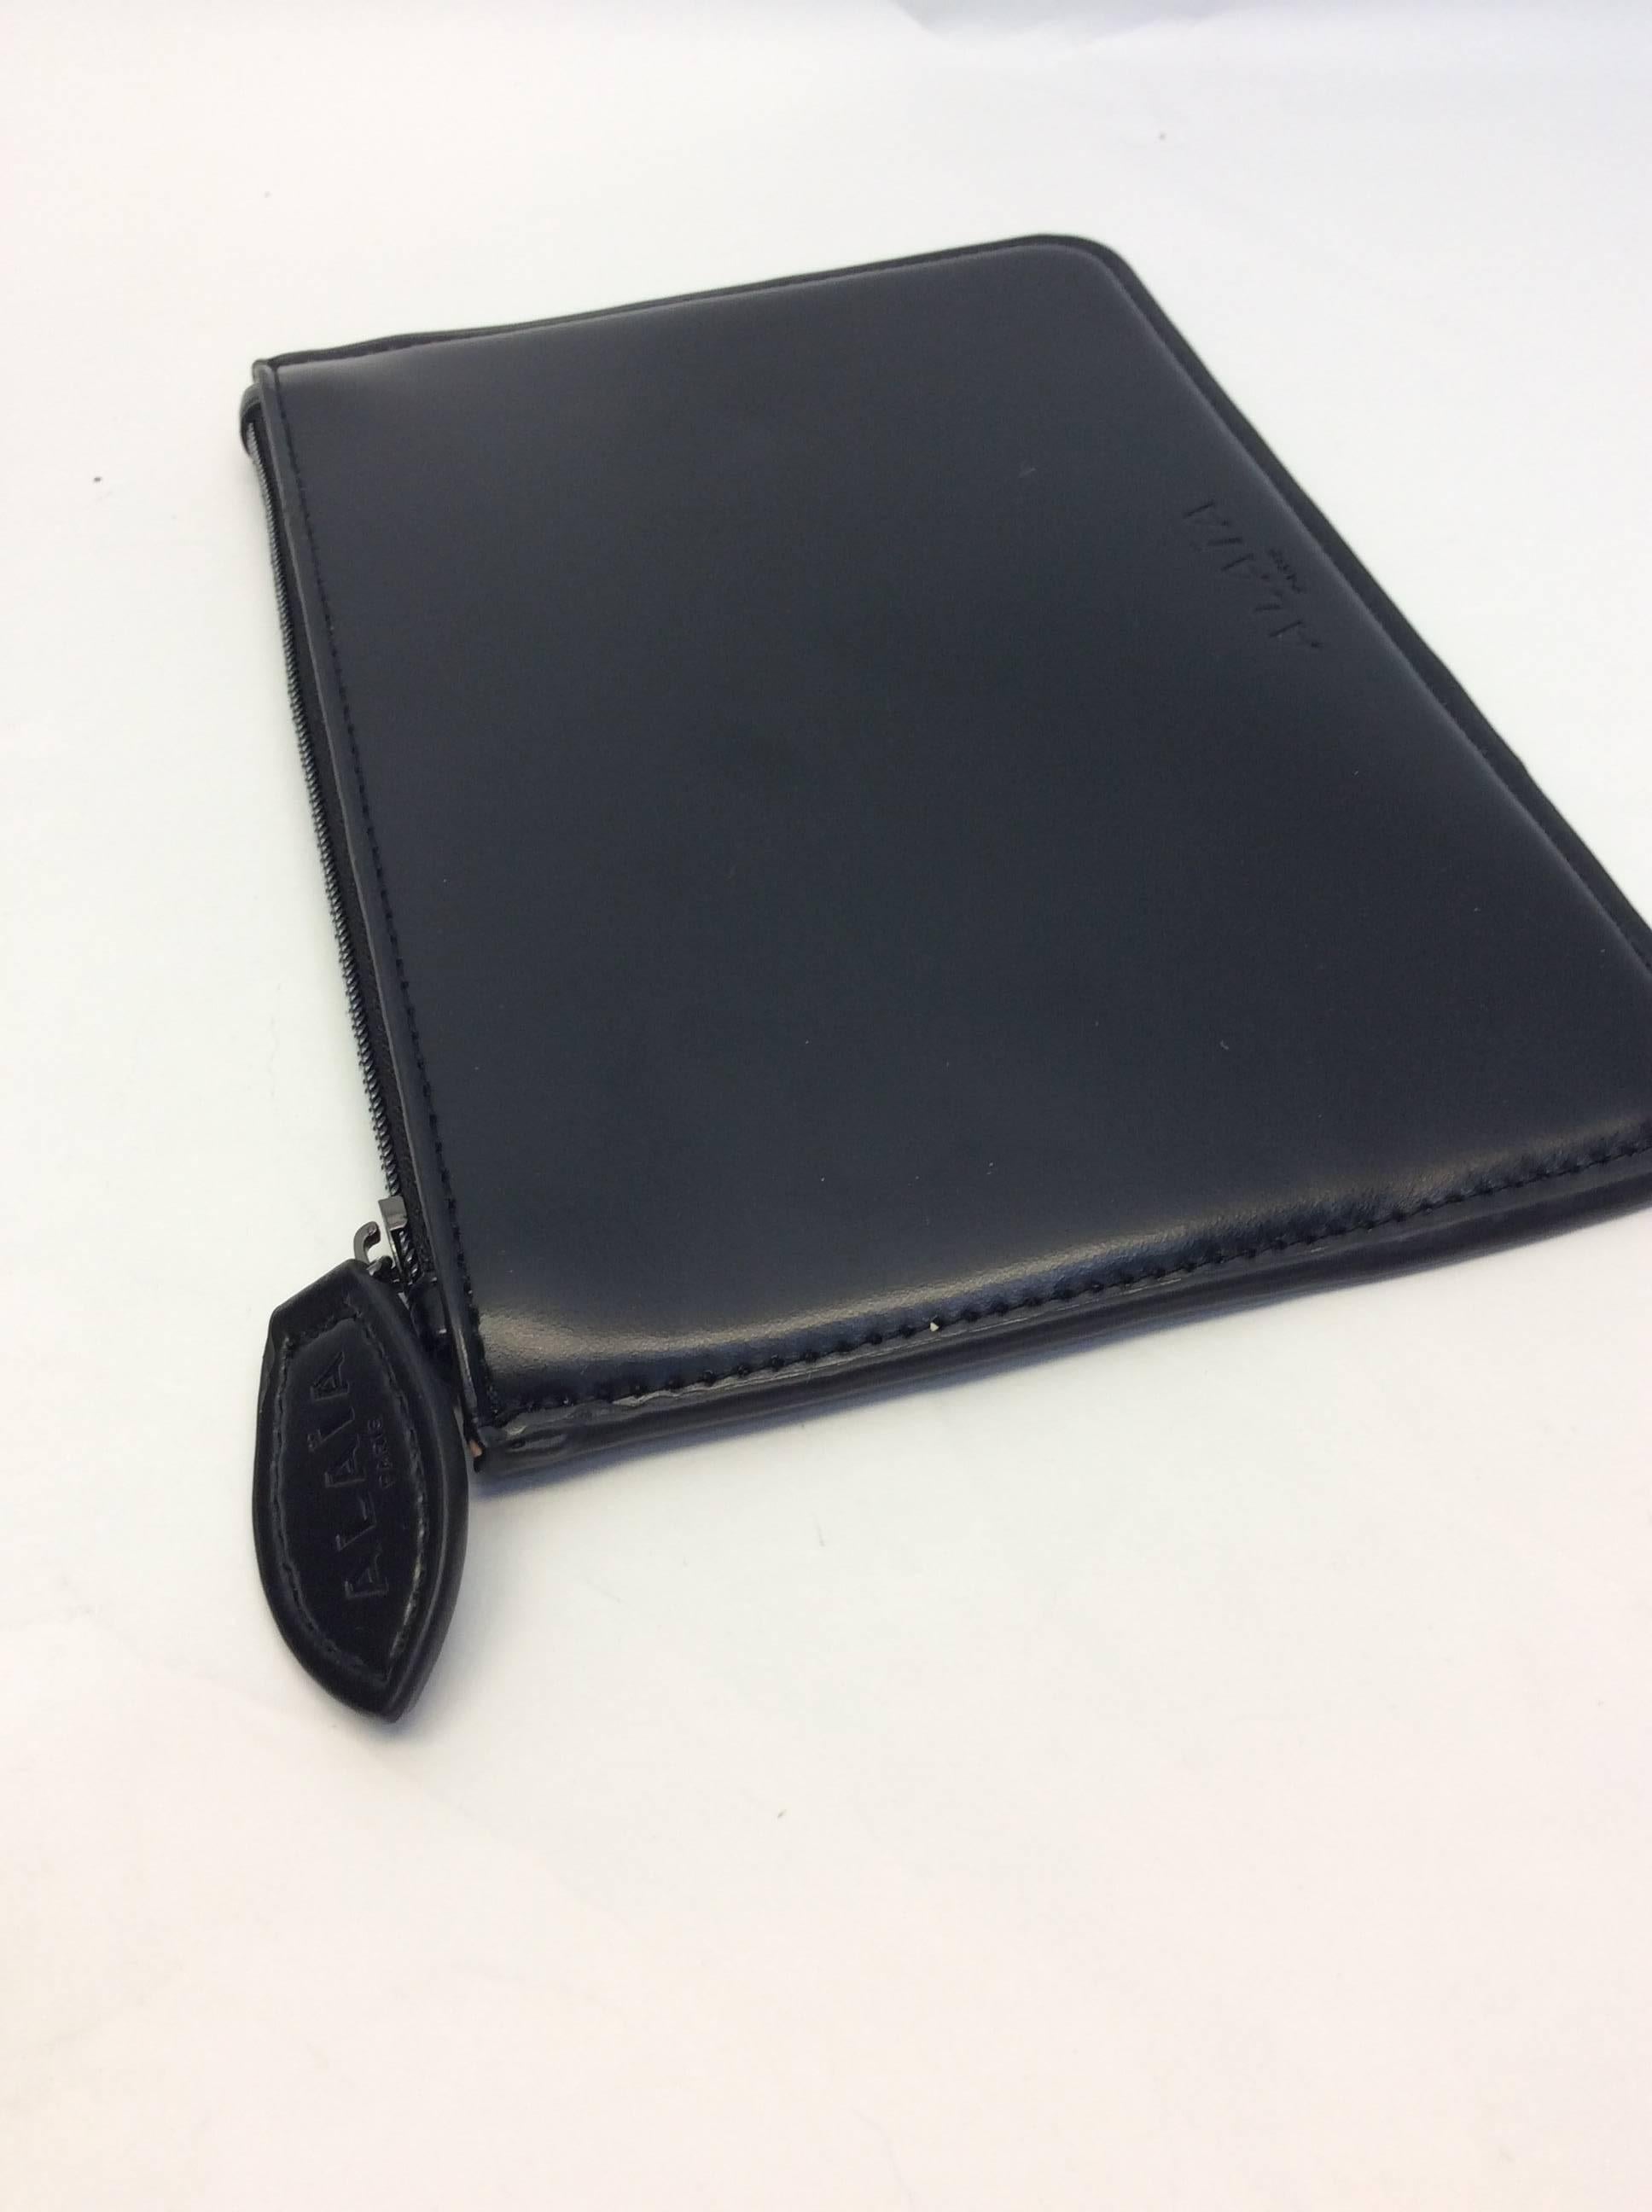 Alaia Black Leather Zip Pouch In New Condition For Sale In Narberth, PA